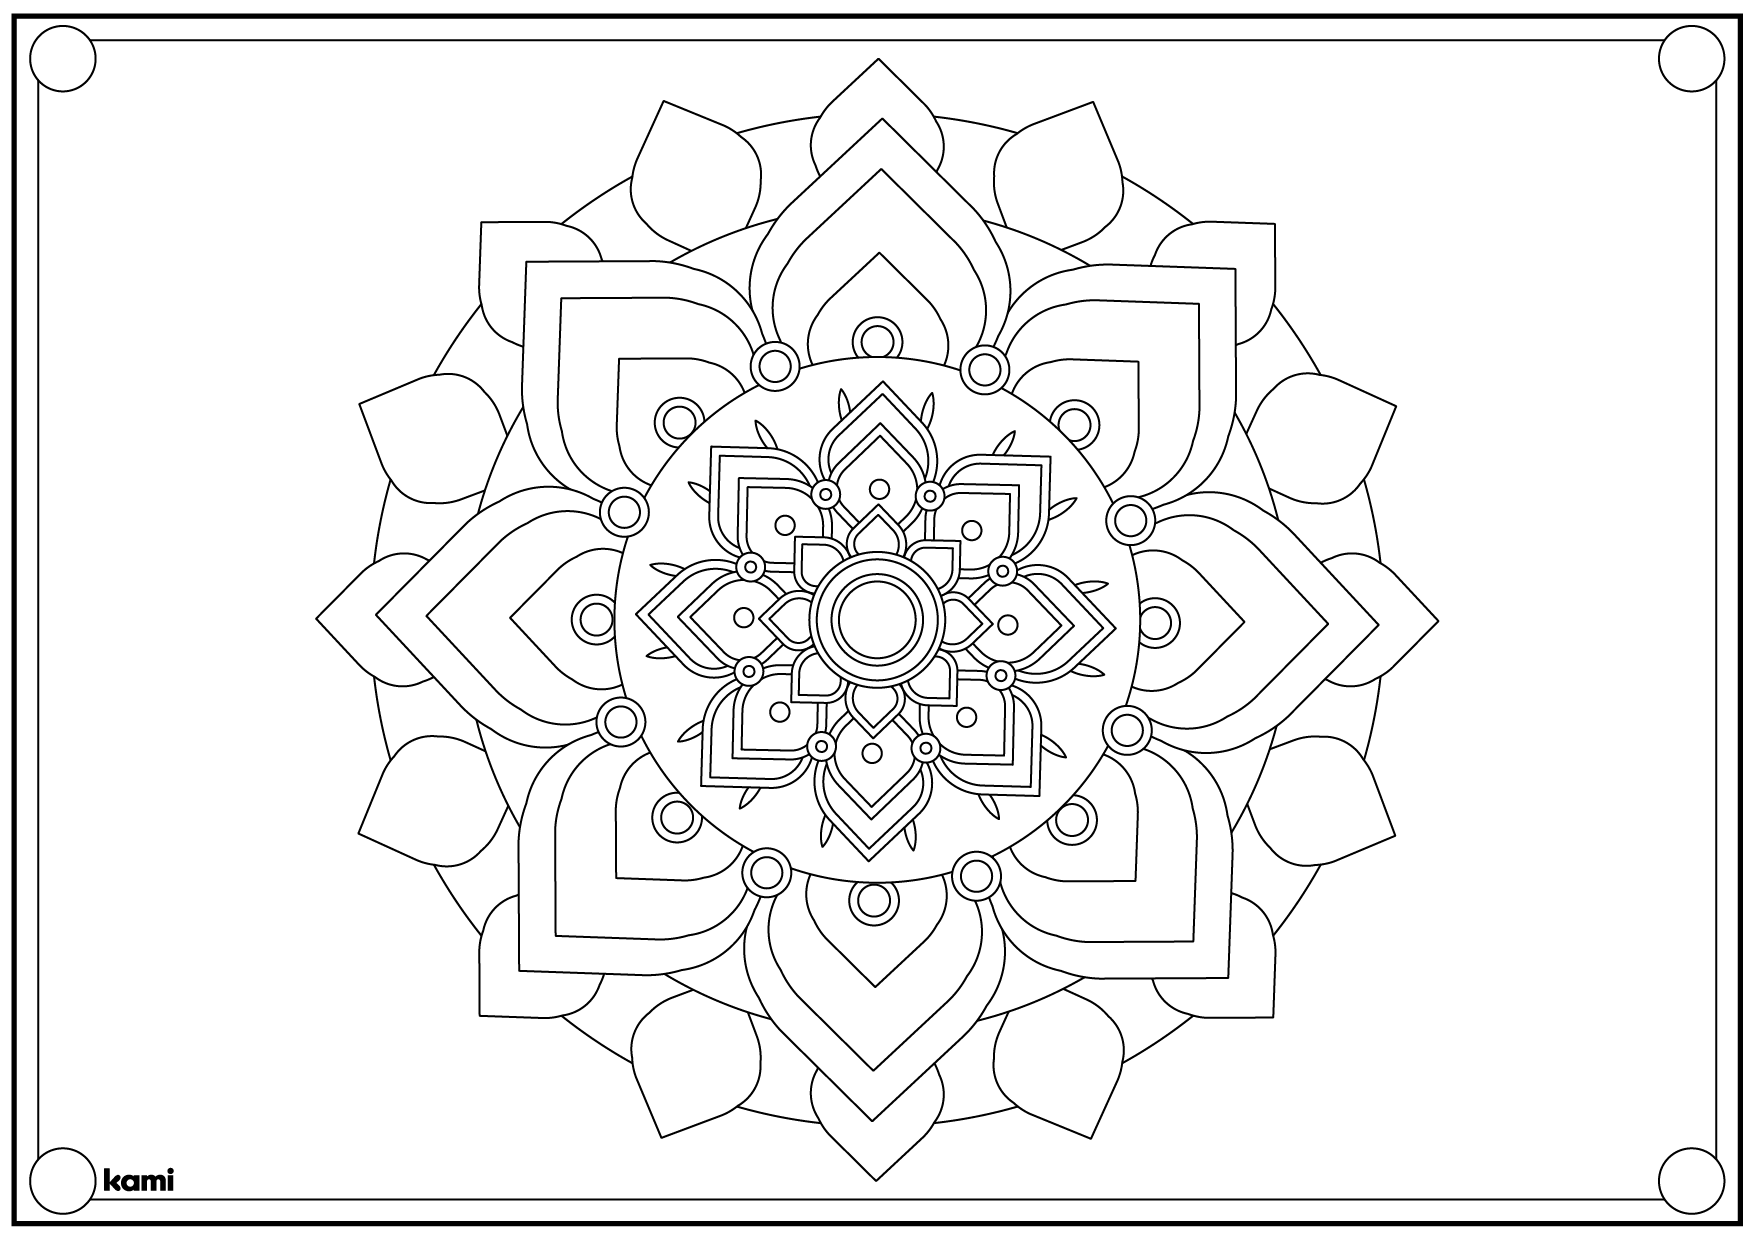 Rangoli coloring sheet for teachers perfect for grades st nd k pre k other classroom resources kami library